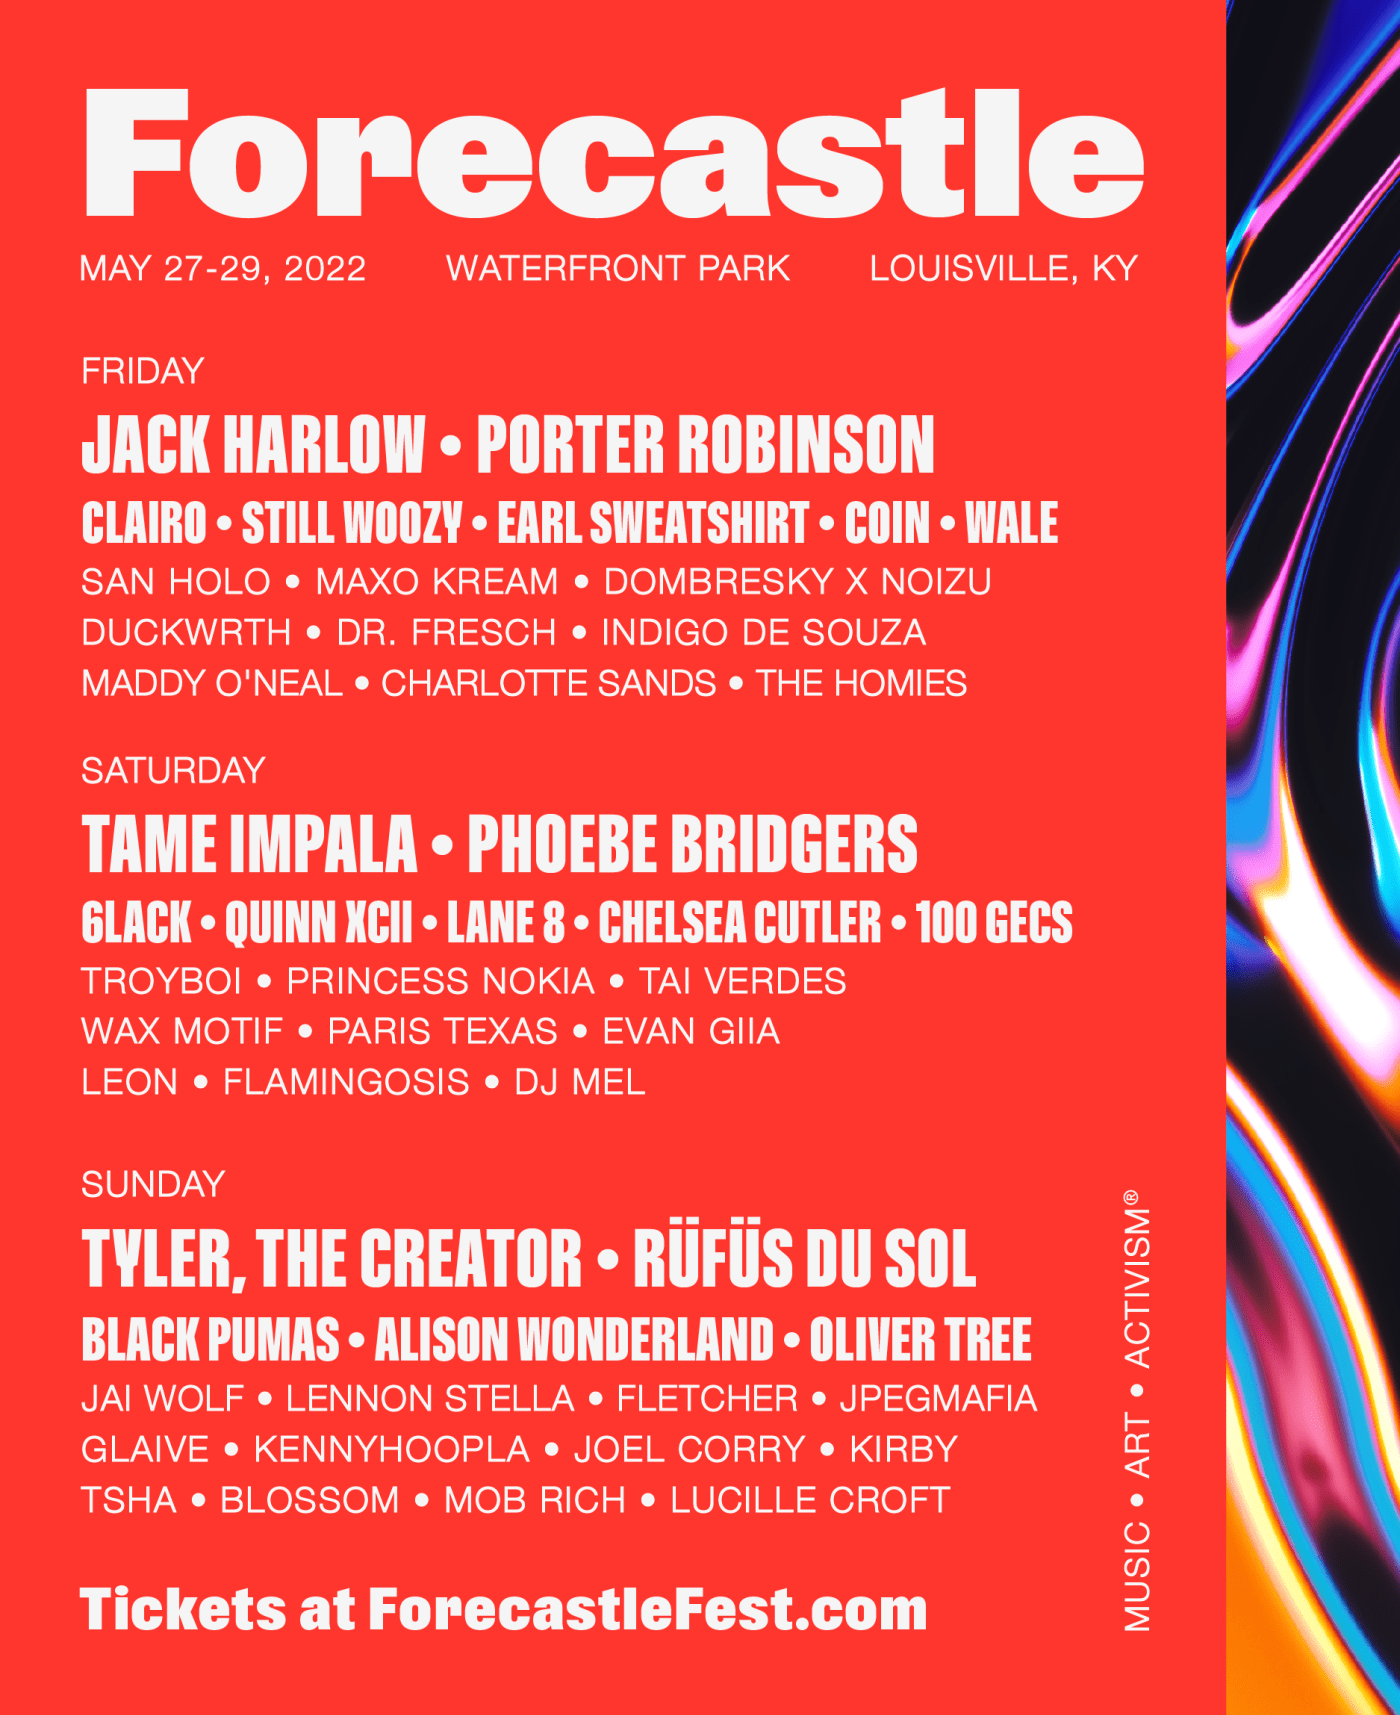 A poster for the 2022 Forecastle Festival is shown